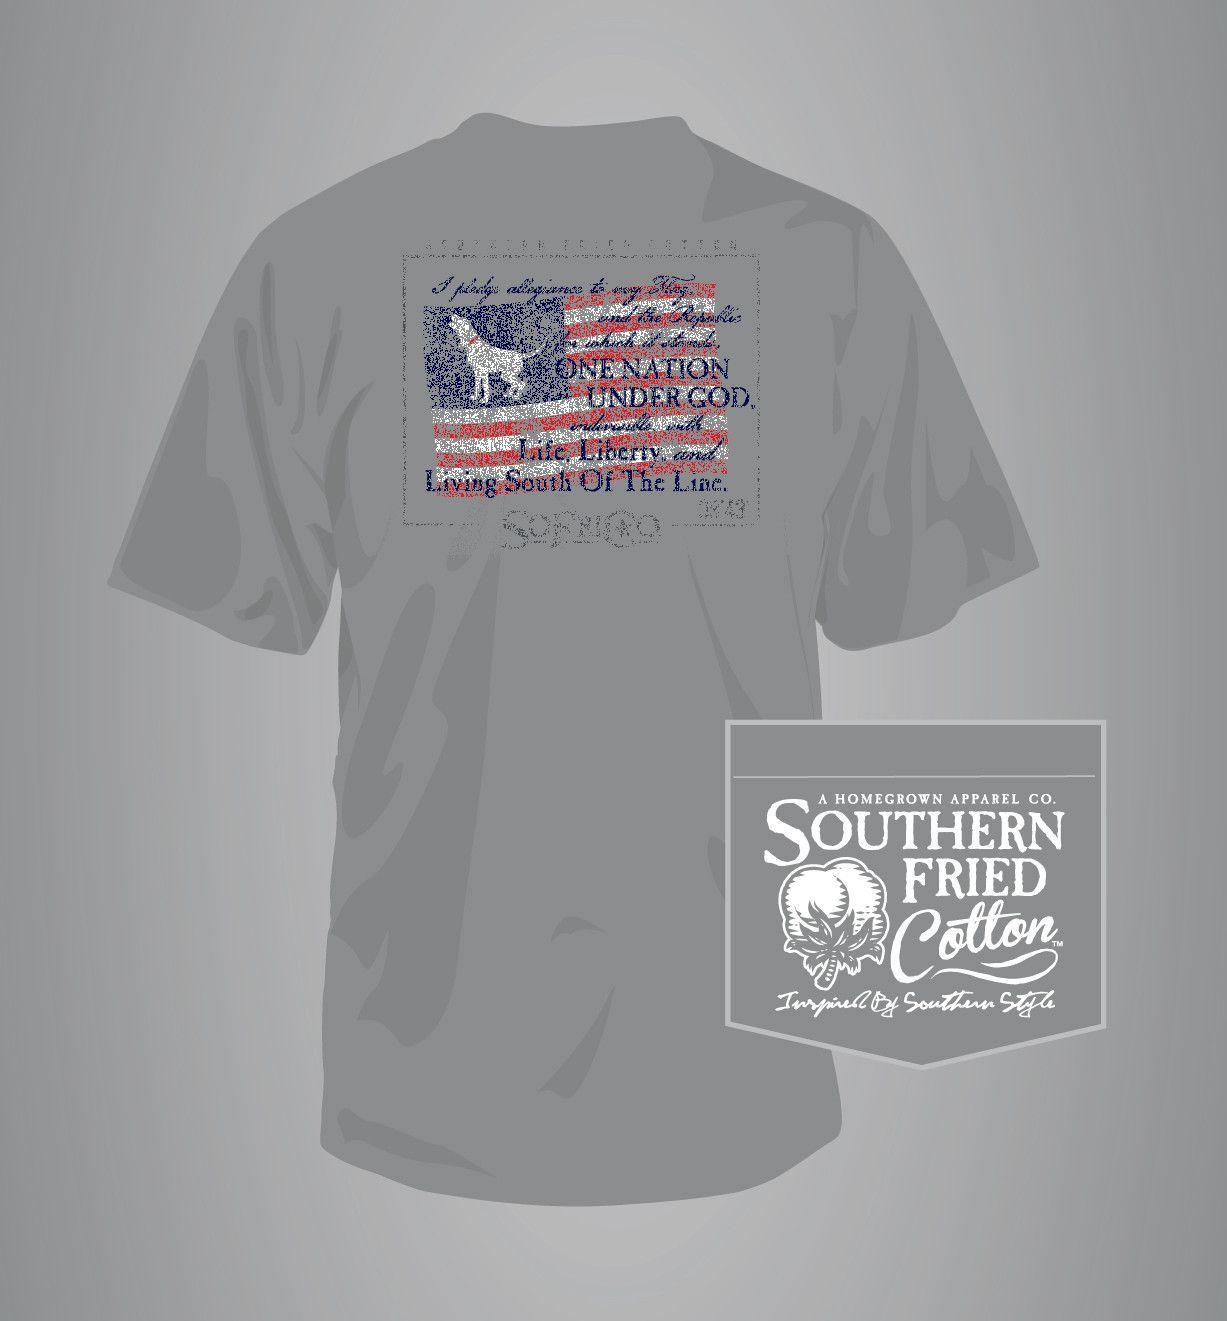 Simply Southern Company Logo - SOUTHERN FRIED COTTON TEE SHIRT S/S - BOGO 50% OFF AUGUST 14 - 17 ...